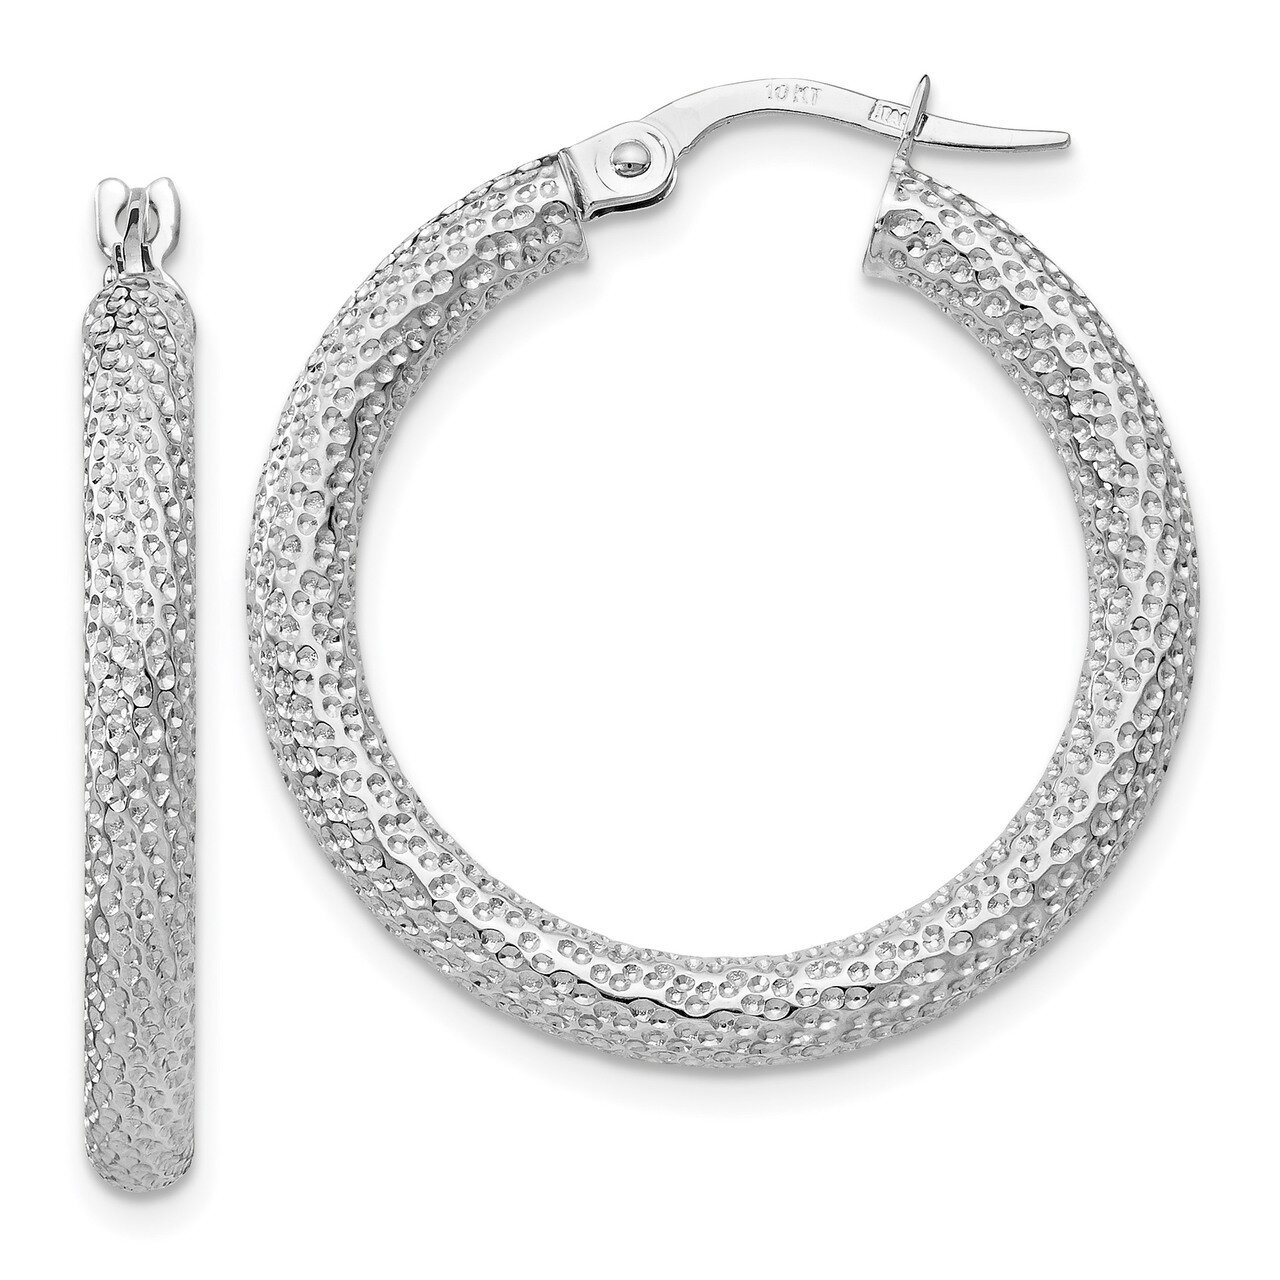 Textured Hinged Hoop Earrings 10k White Gold Polished HB-10LE271